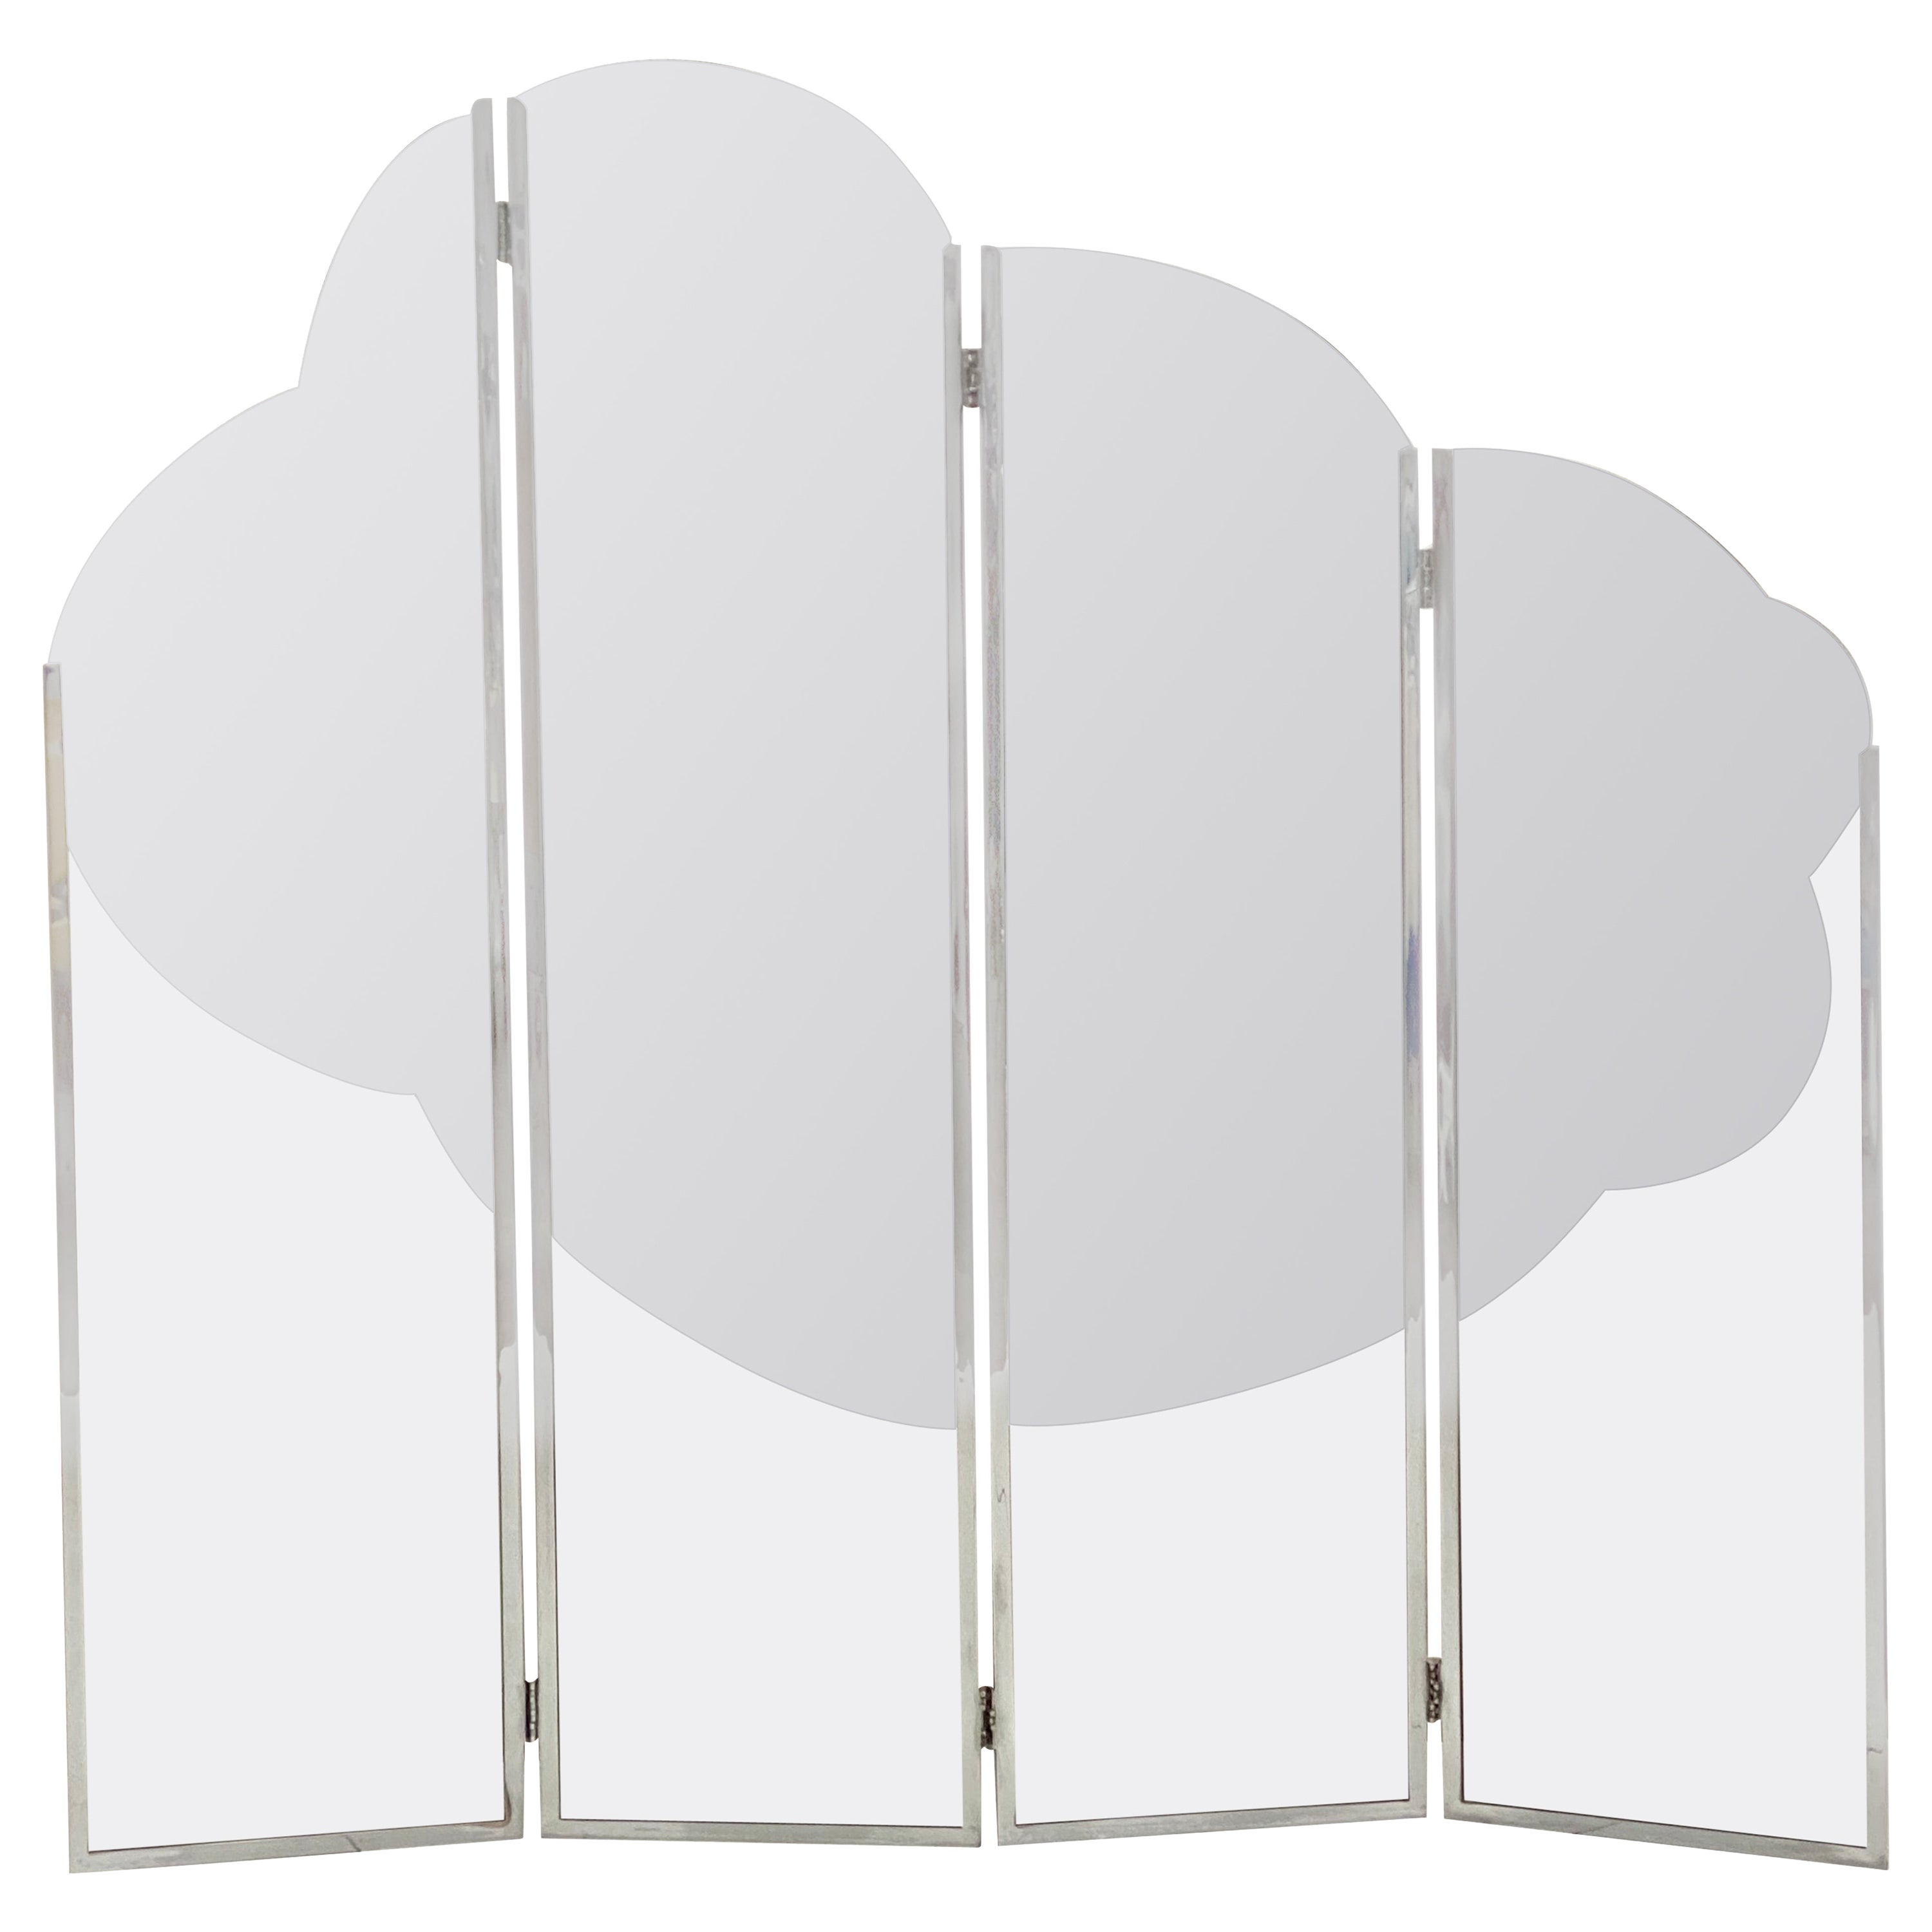 Stunning folding 1960s 'Cumulus' cloud form mirrorred screen in the style of French artist Guy De Rougement who produced several highly sought after and valuable pieces of design art based on the cloud form. The mirrored cloud form is formed within